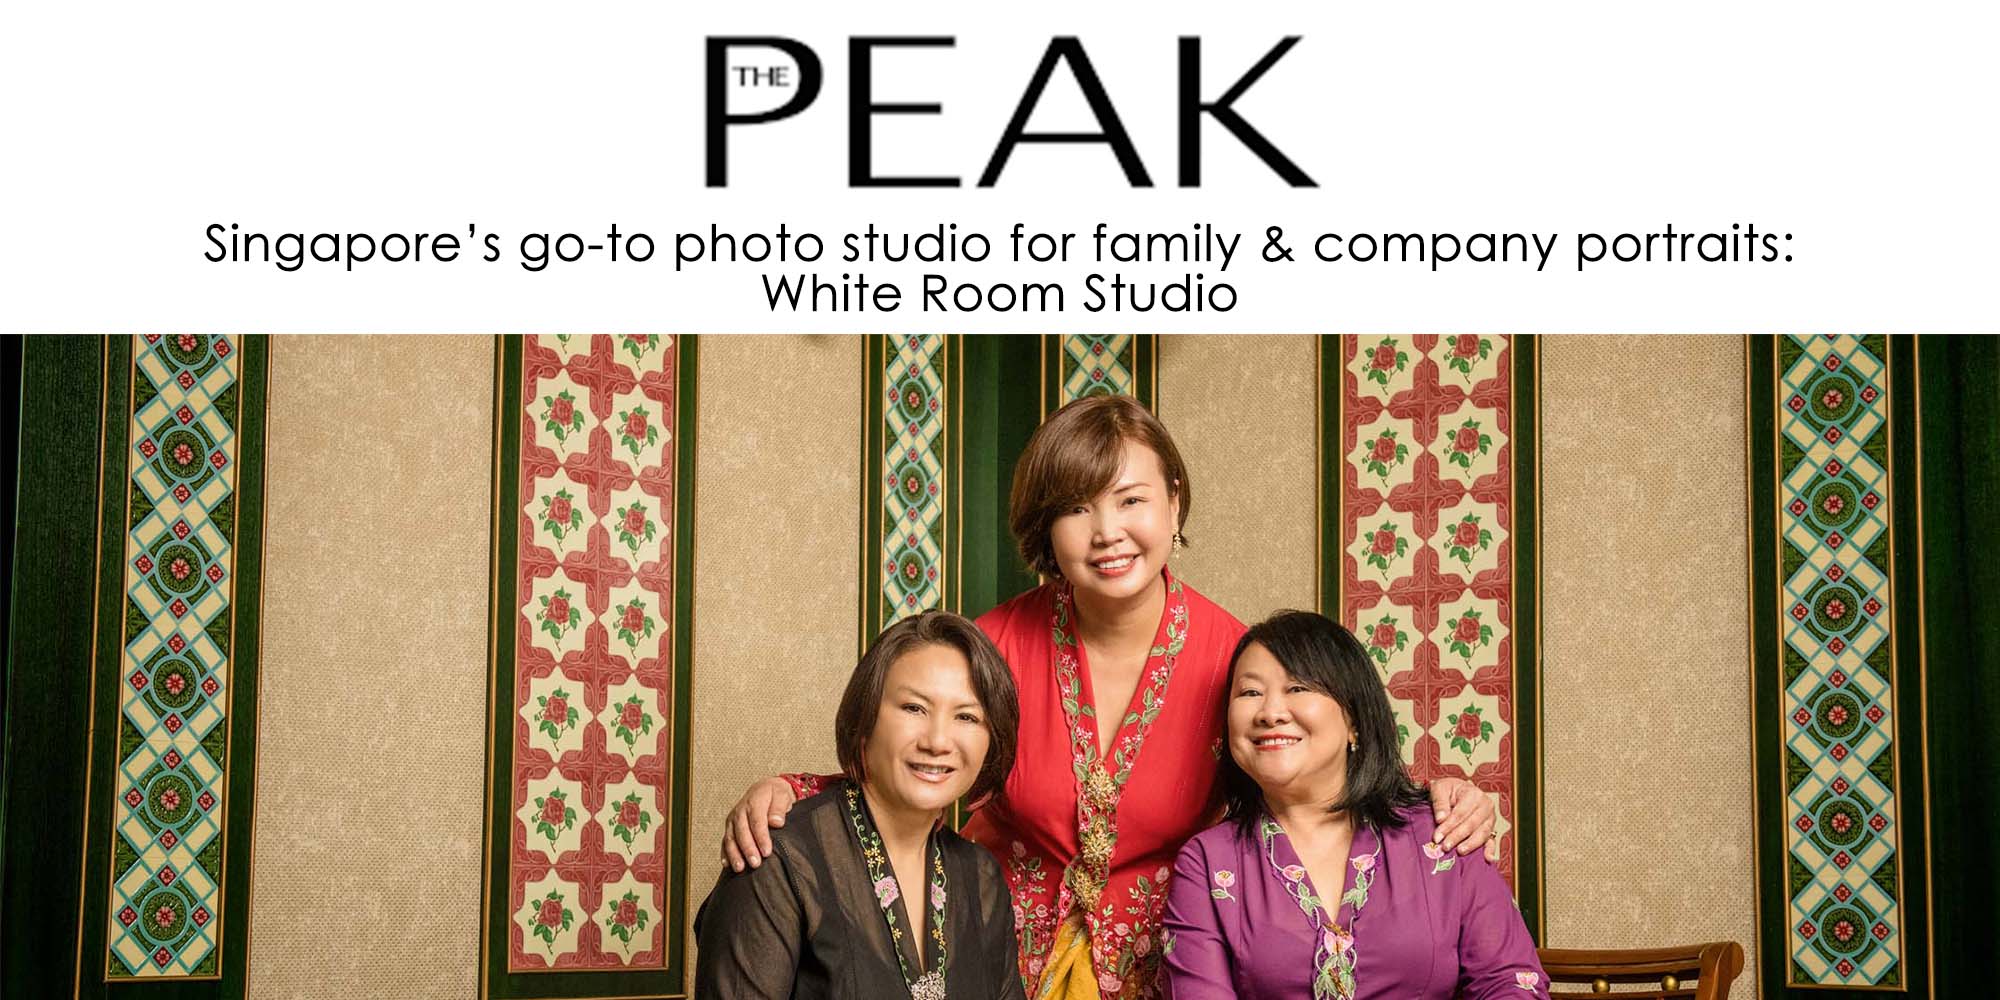 The Peak Singapore - Best Photo Studio in Singapore for Family Photography and Corporate Photography - White Room Studio